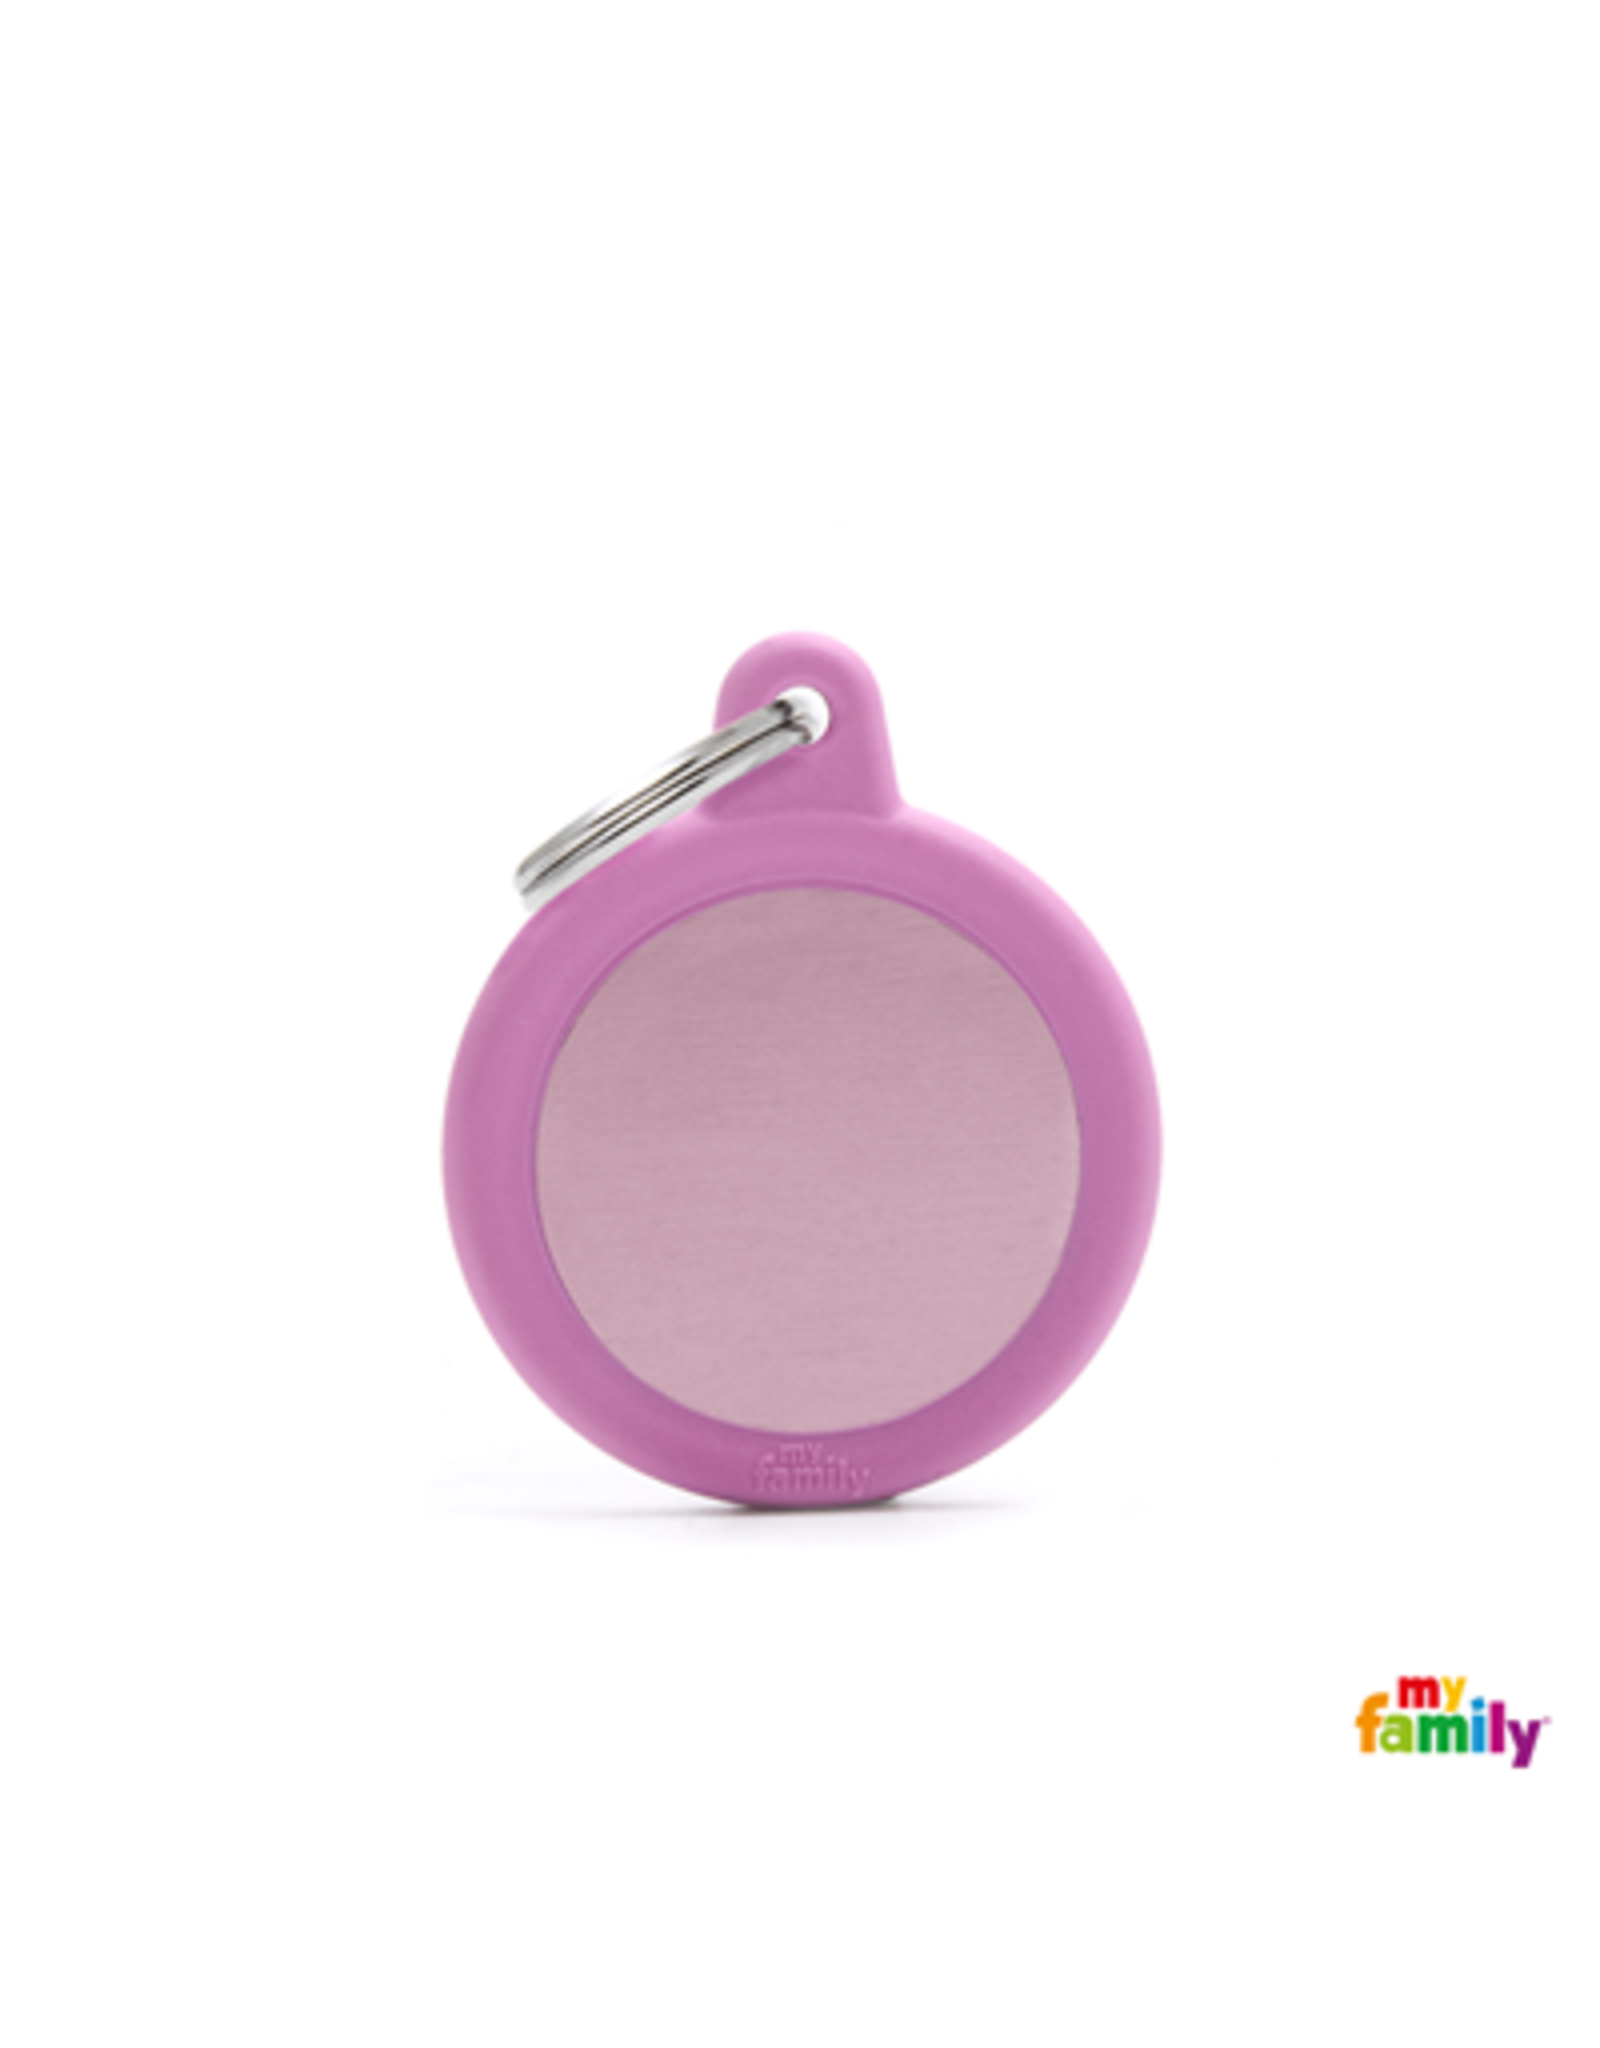 MyFamily Tag - Pink Circle Rubber